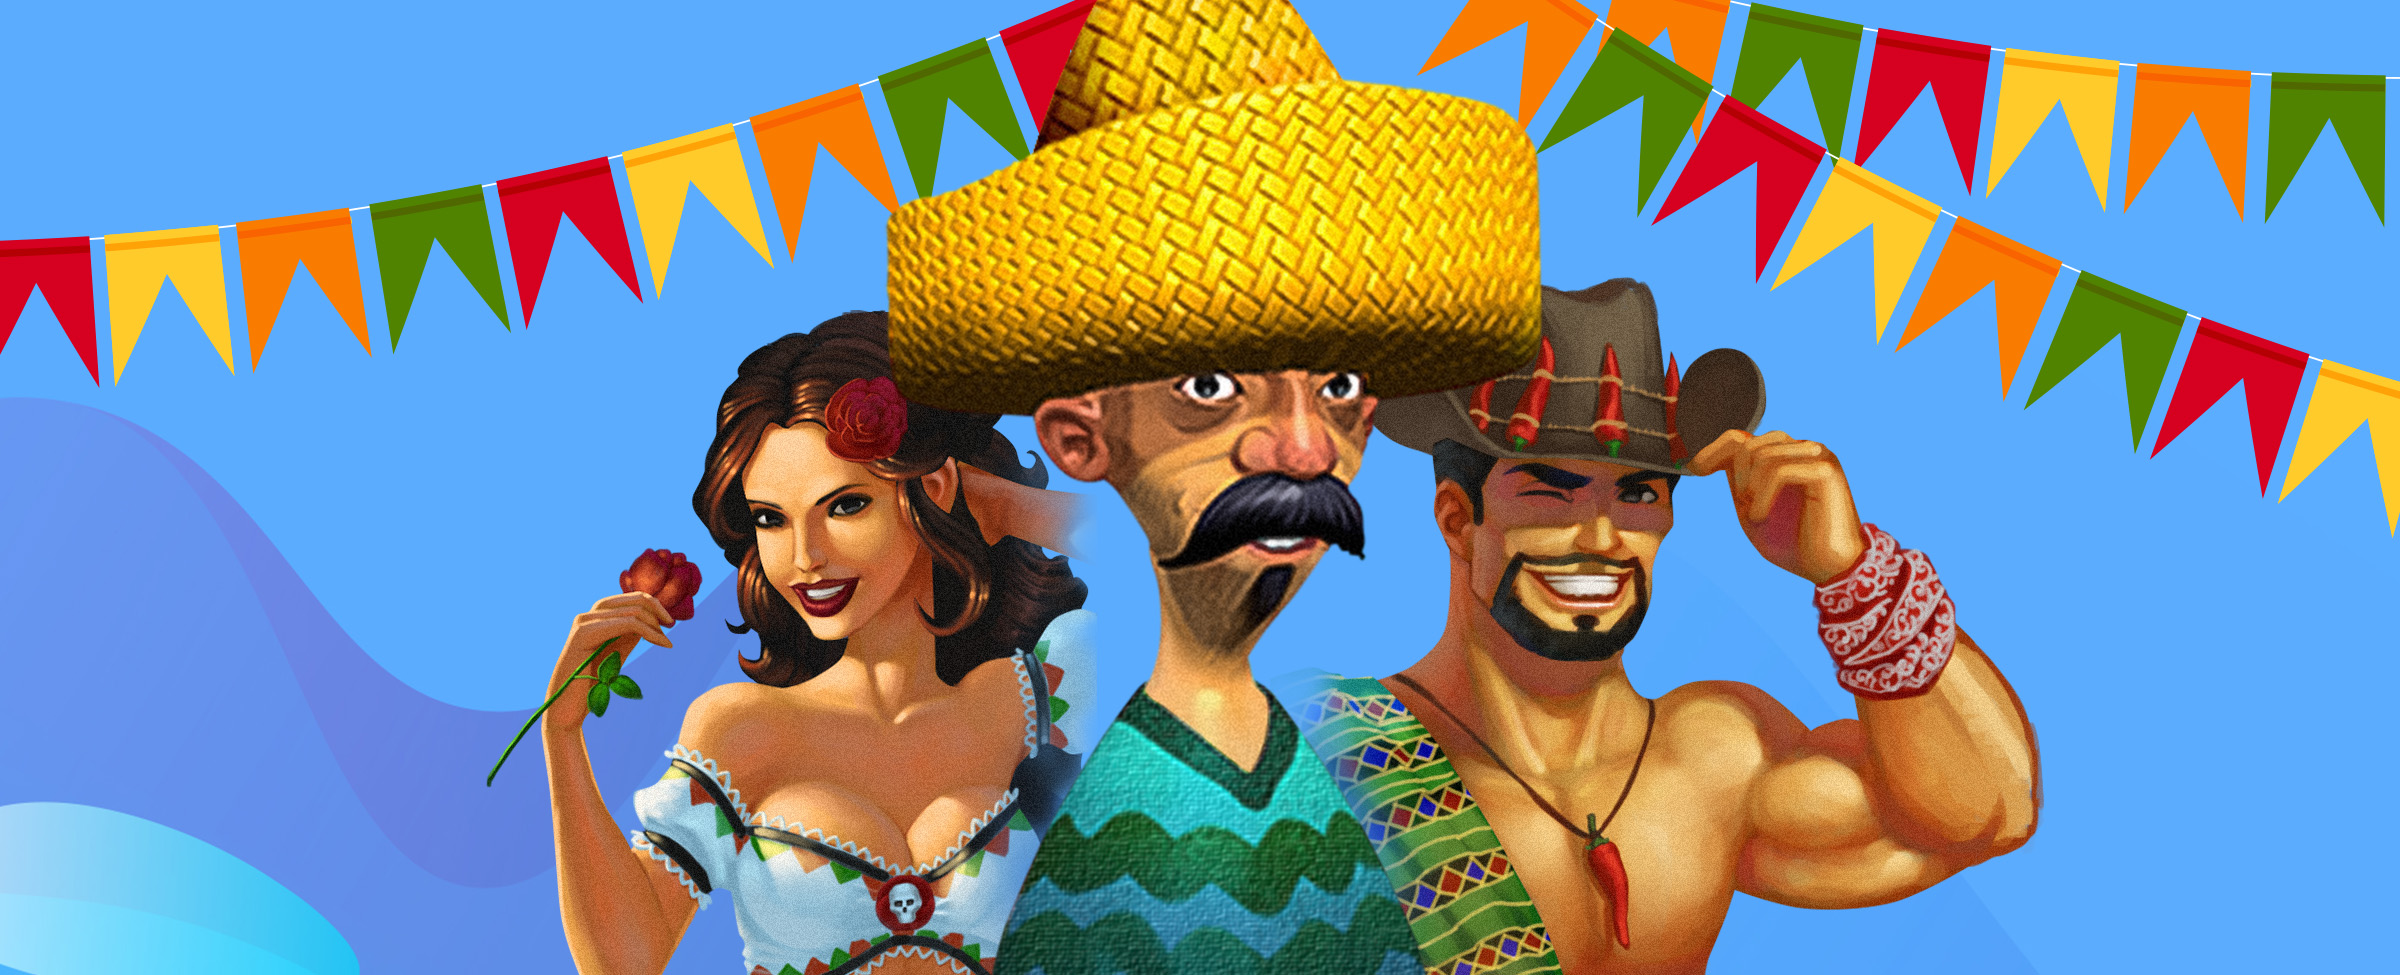 Hop south of the border and play Amigos Fiesta – an outrageously fun slot to play at any time of the month!